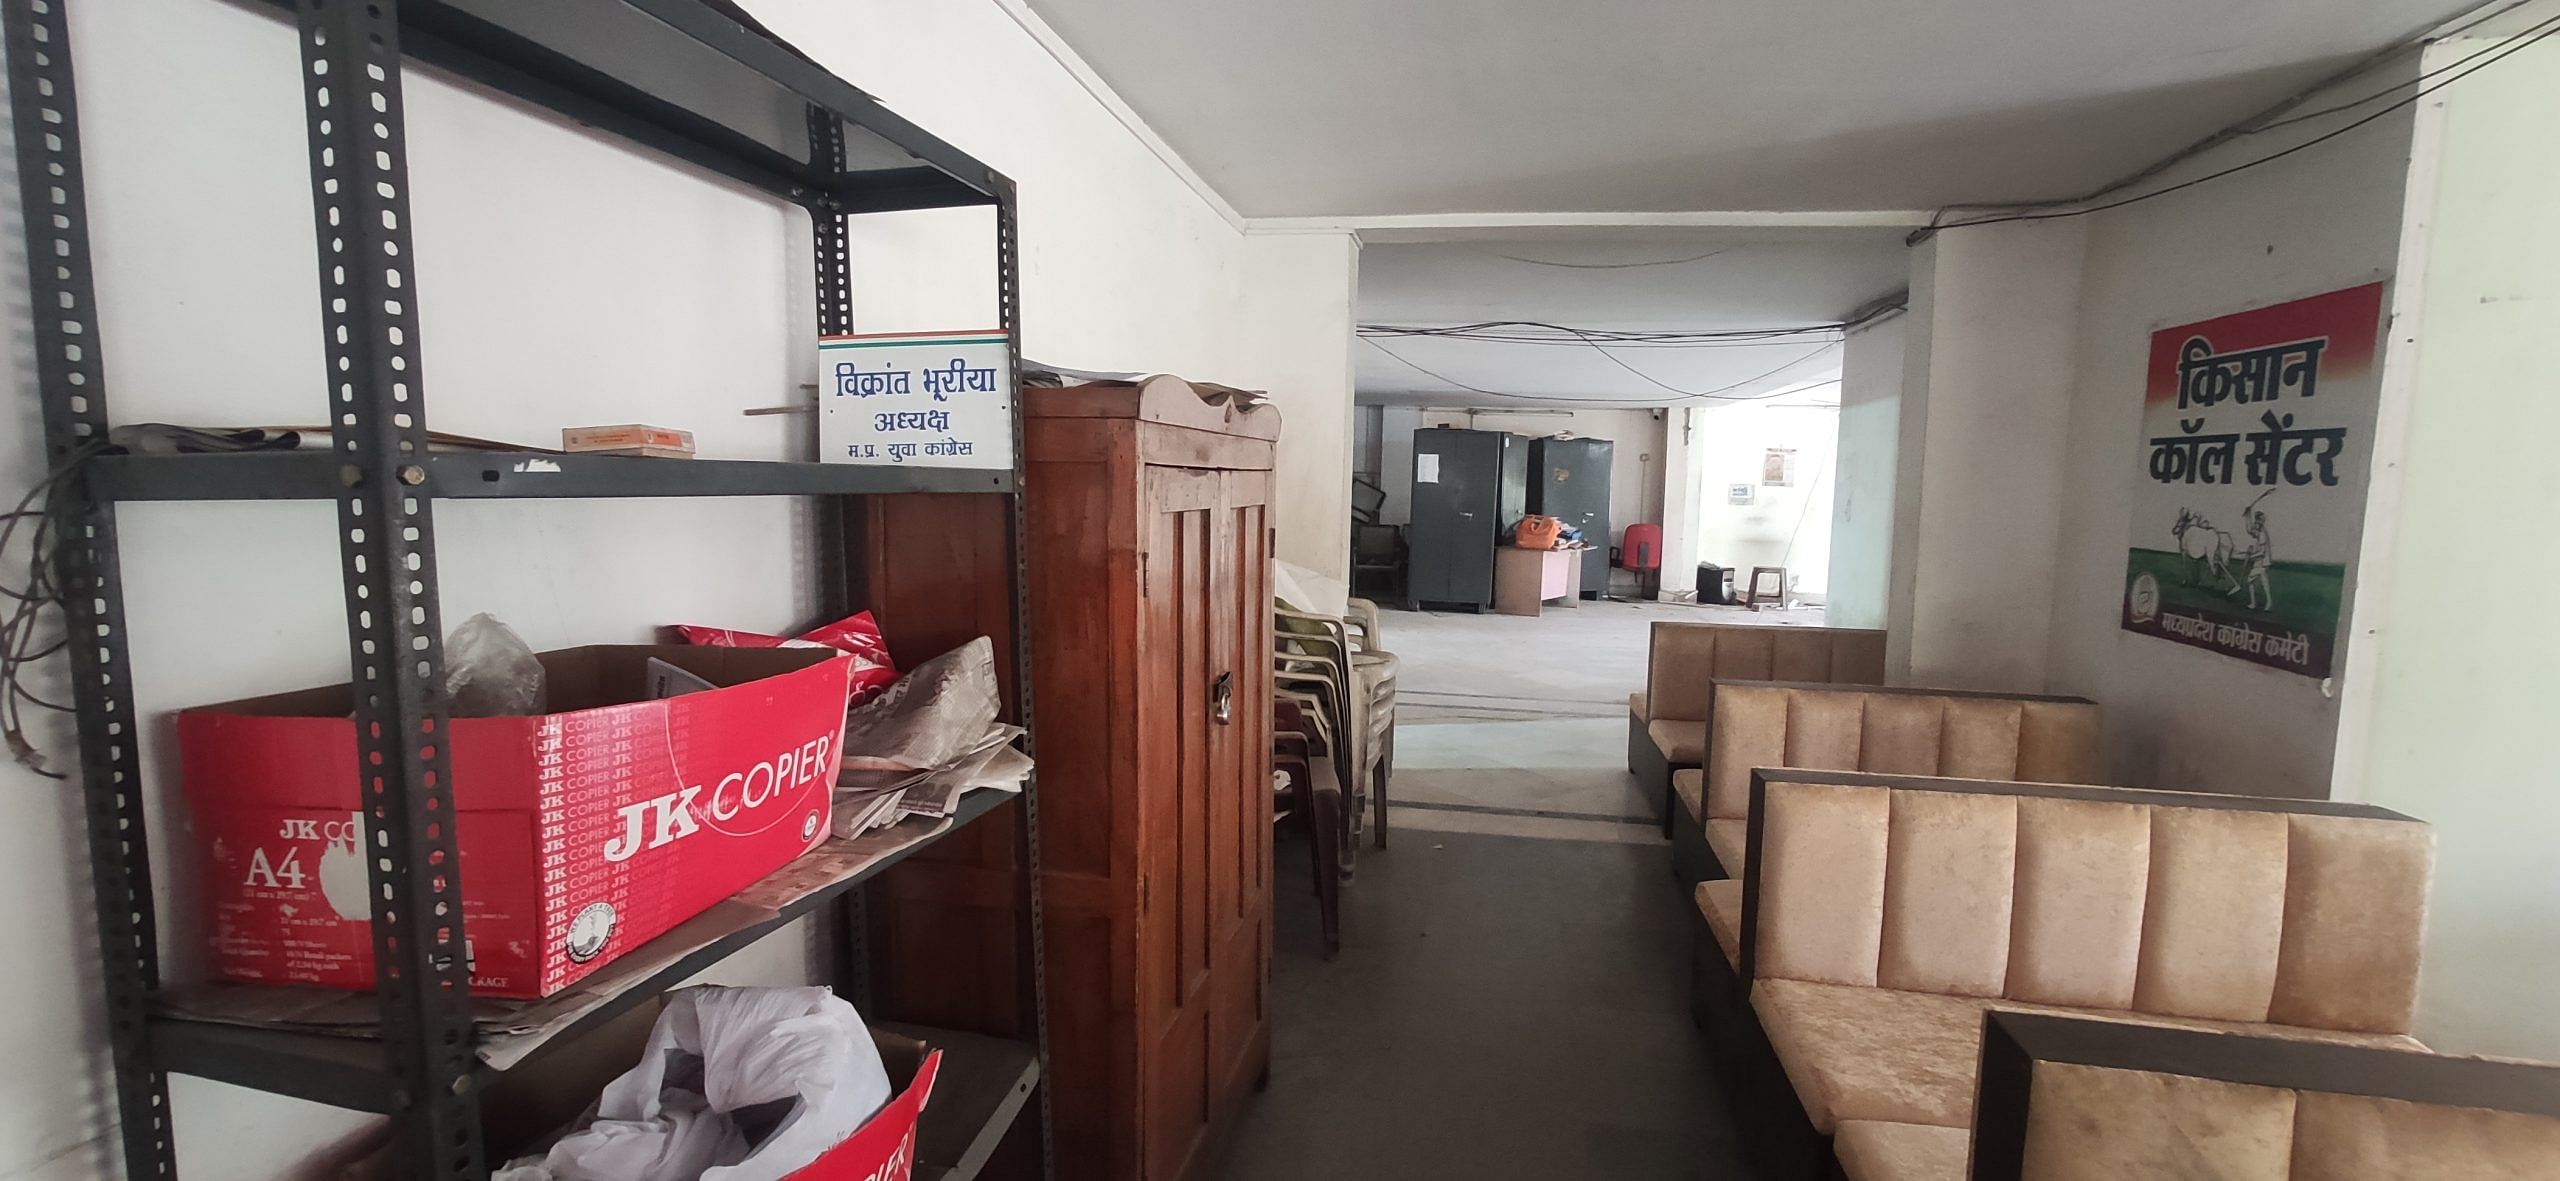 The MP Congress office is undergoing its first major revamp since its inauguration in 2005 | Iram Siddique